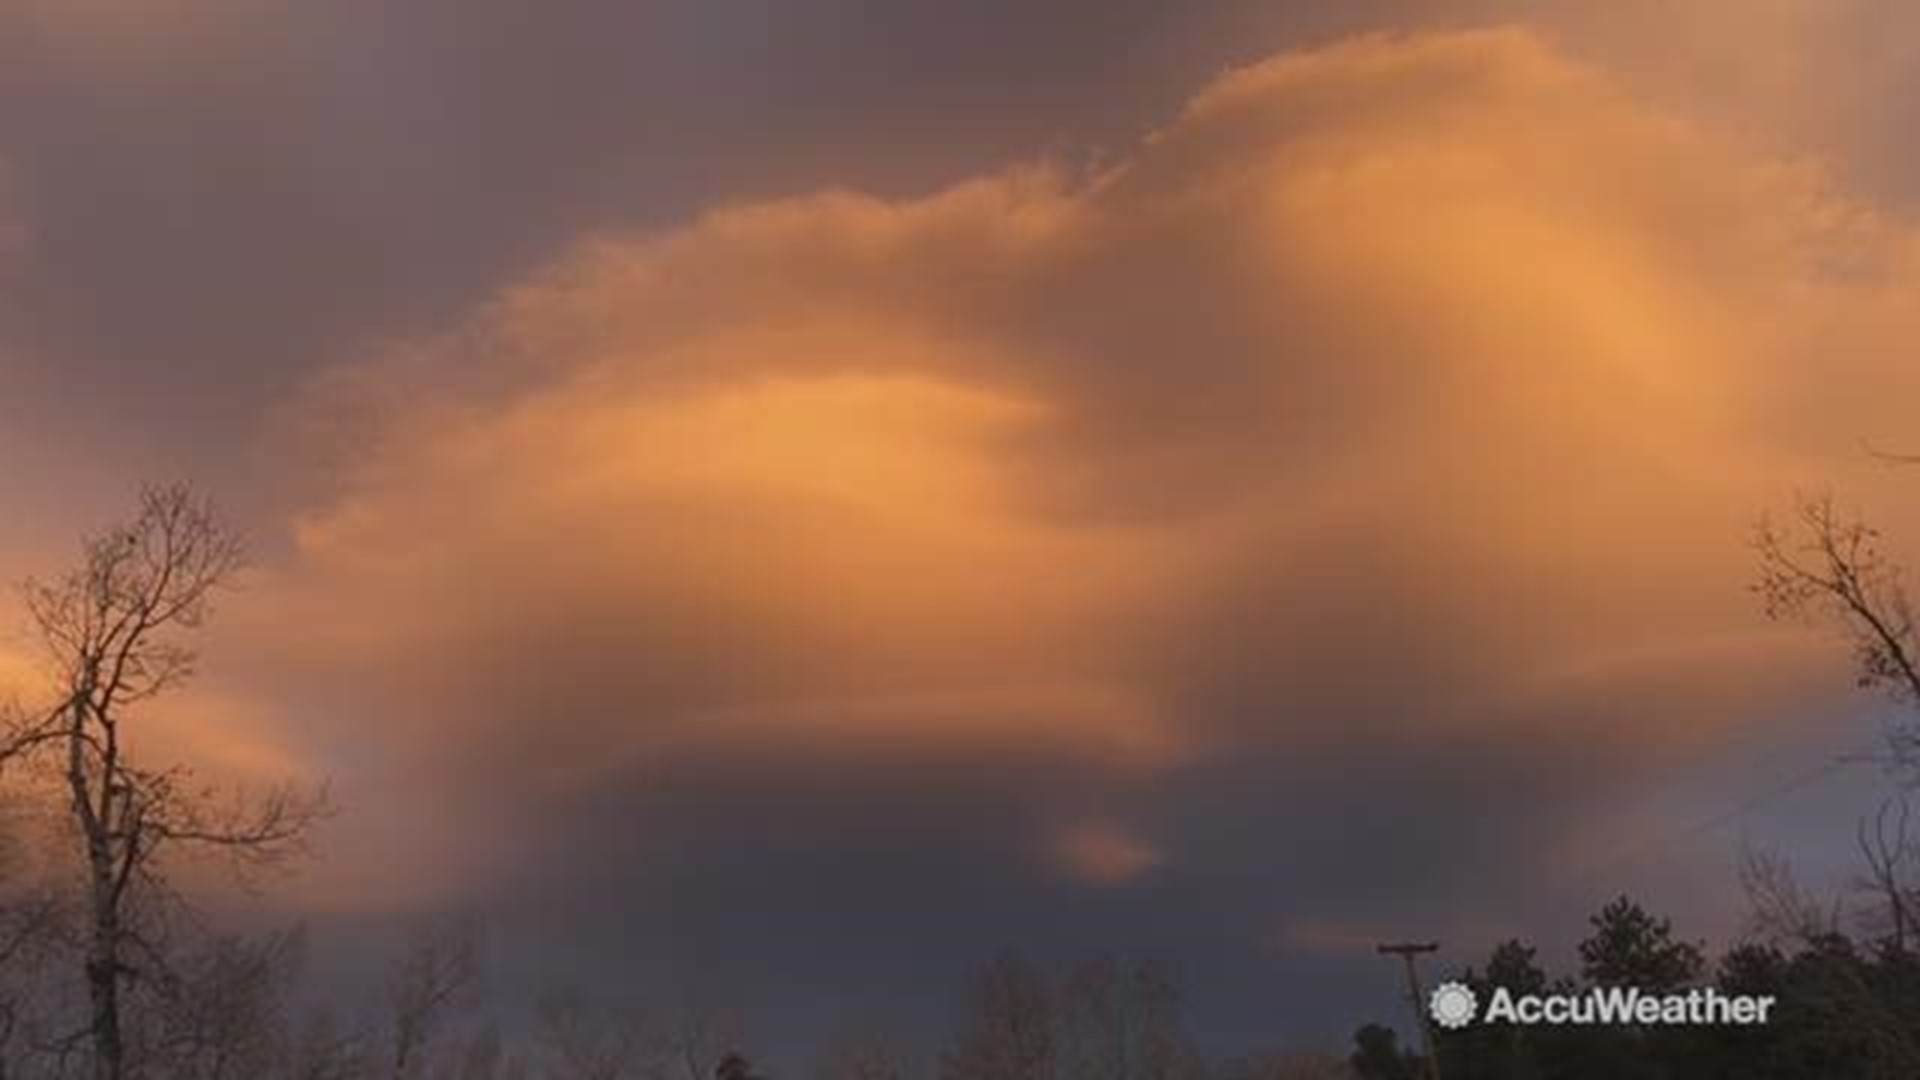 Incredible lenticular clouds were seen over Idaho Springs, Colorado at sunset on December 10.